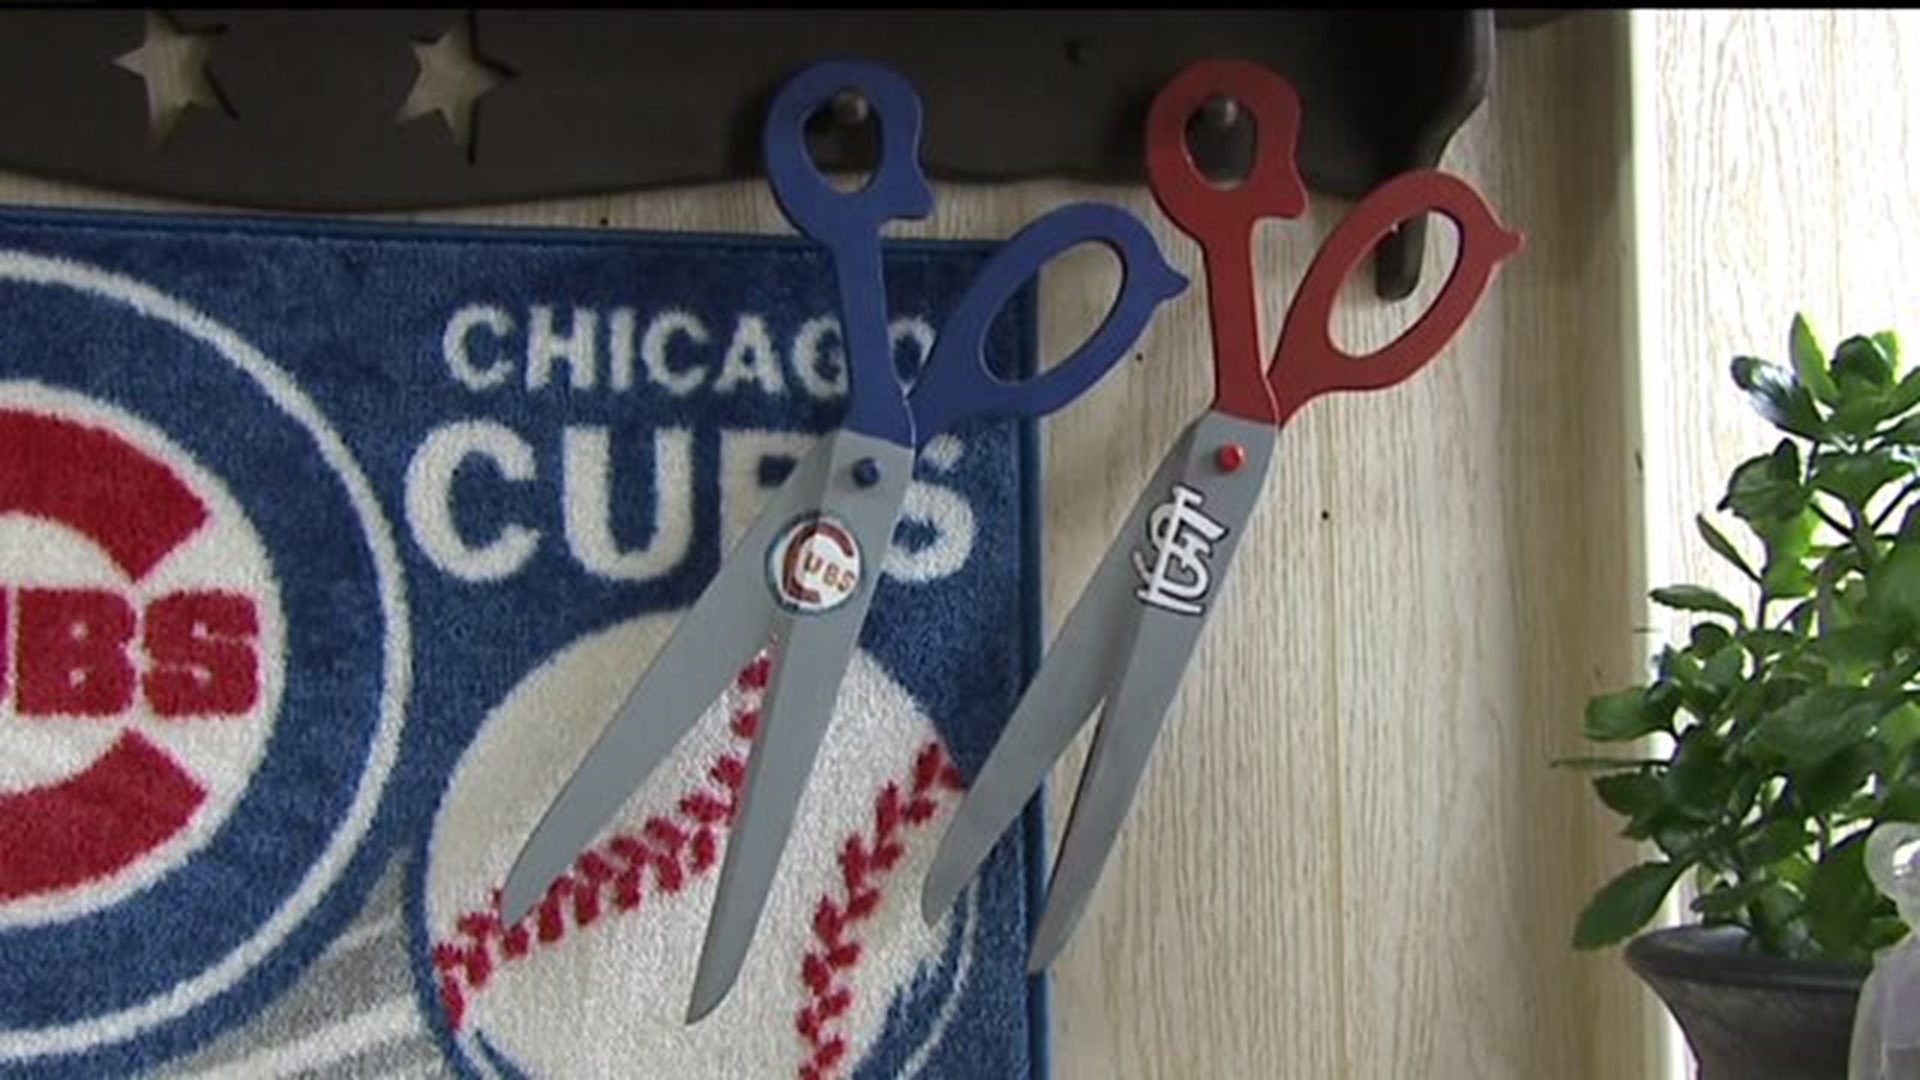 Galesburg barber shop divided over Cubs and Cards